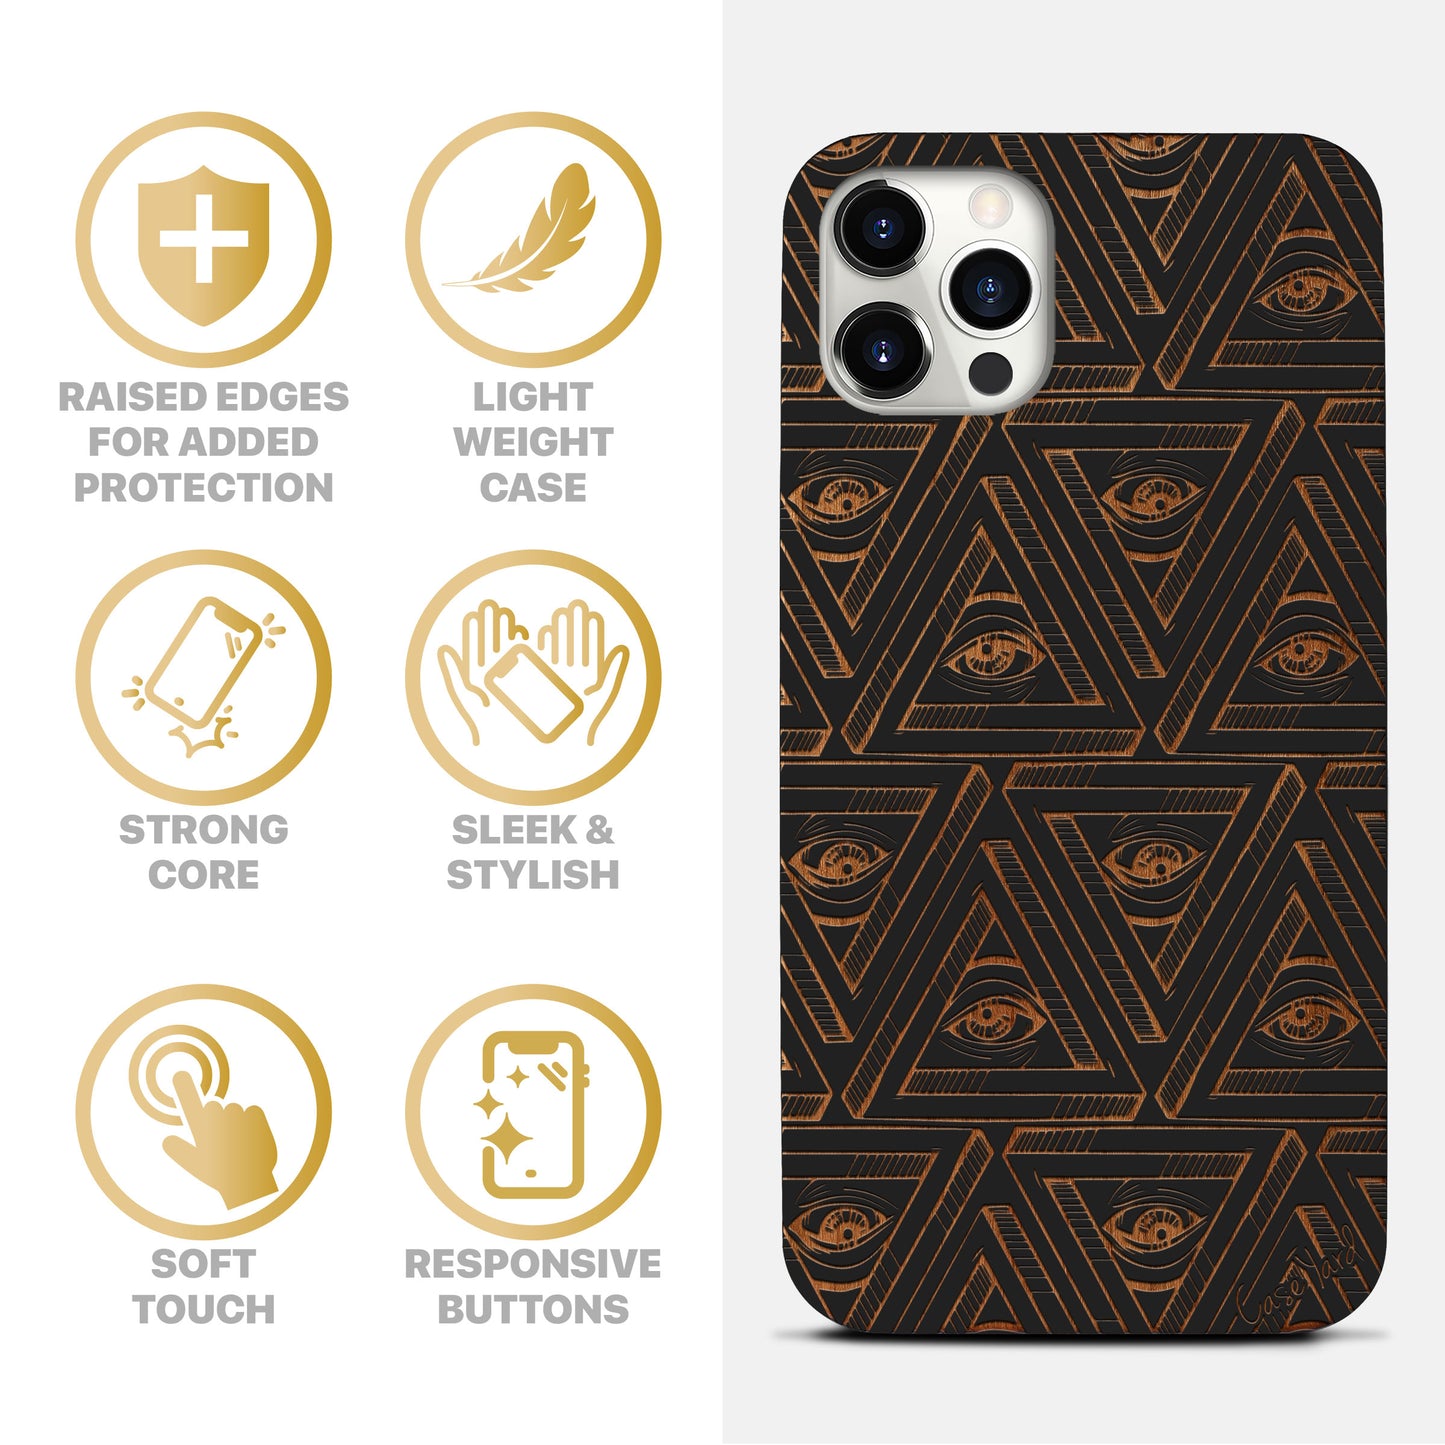 Wooden Cell Phone Case Cover, Laser Engraved case for iPhone & Samsung phone All Seeing Eyes Pattern Wood Design